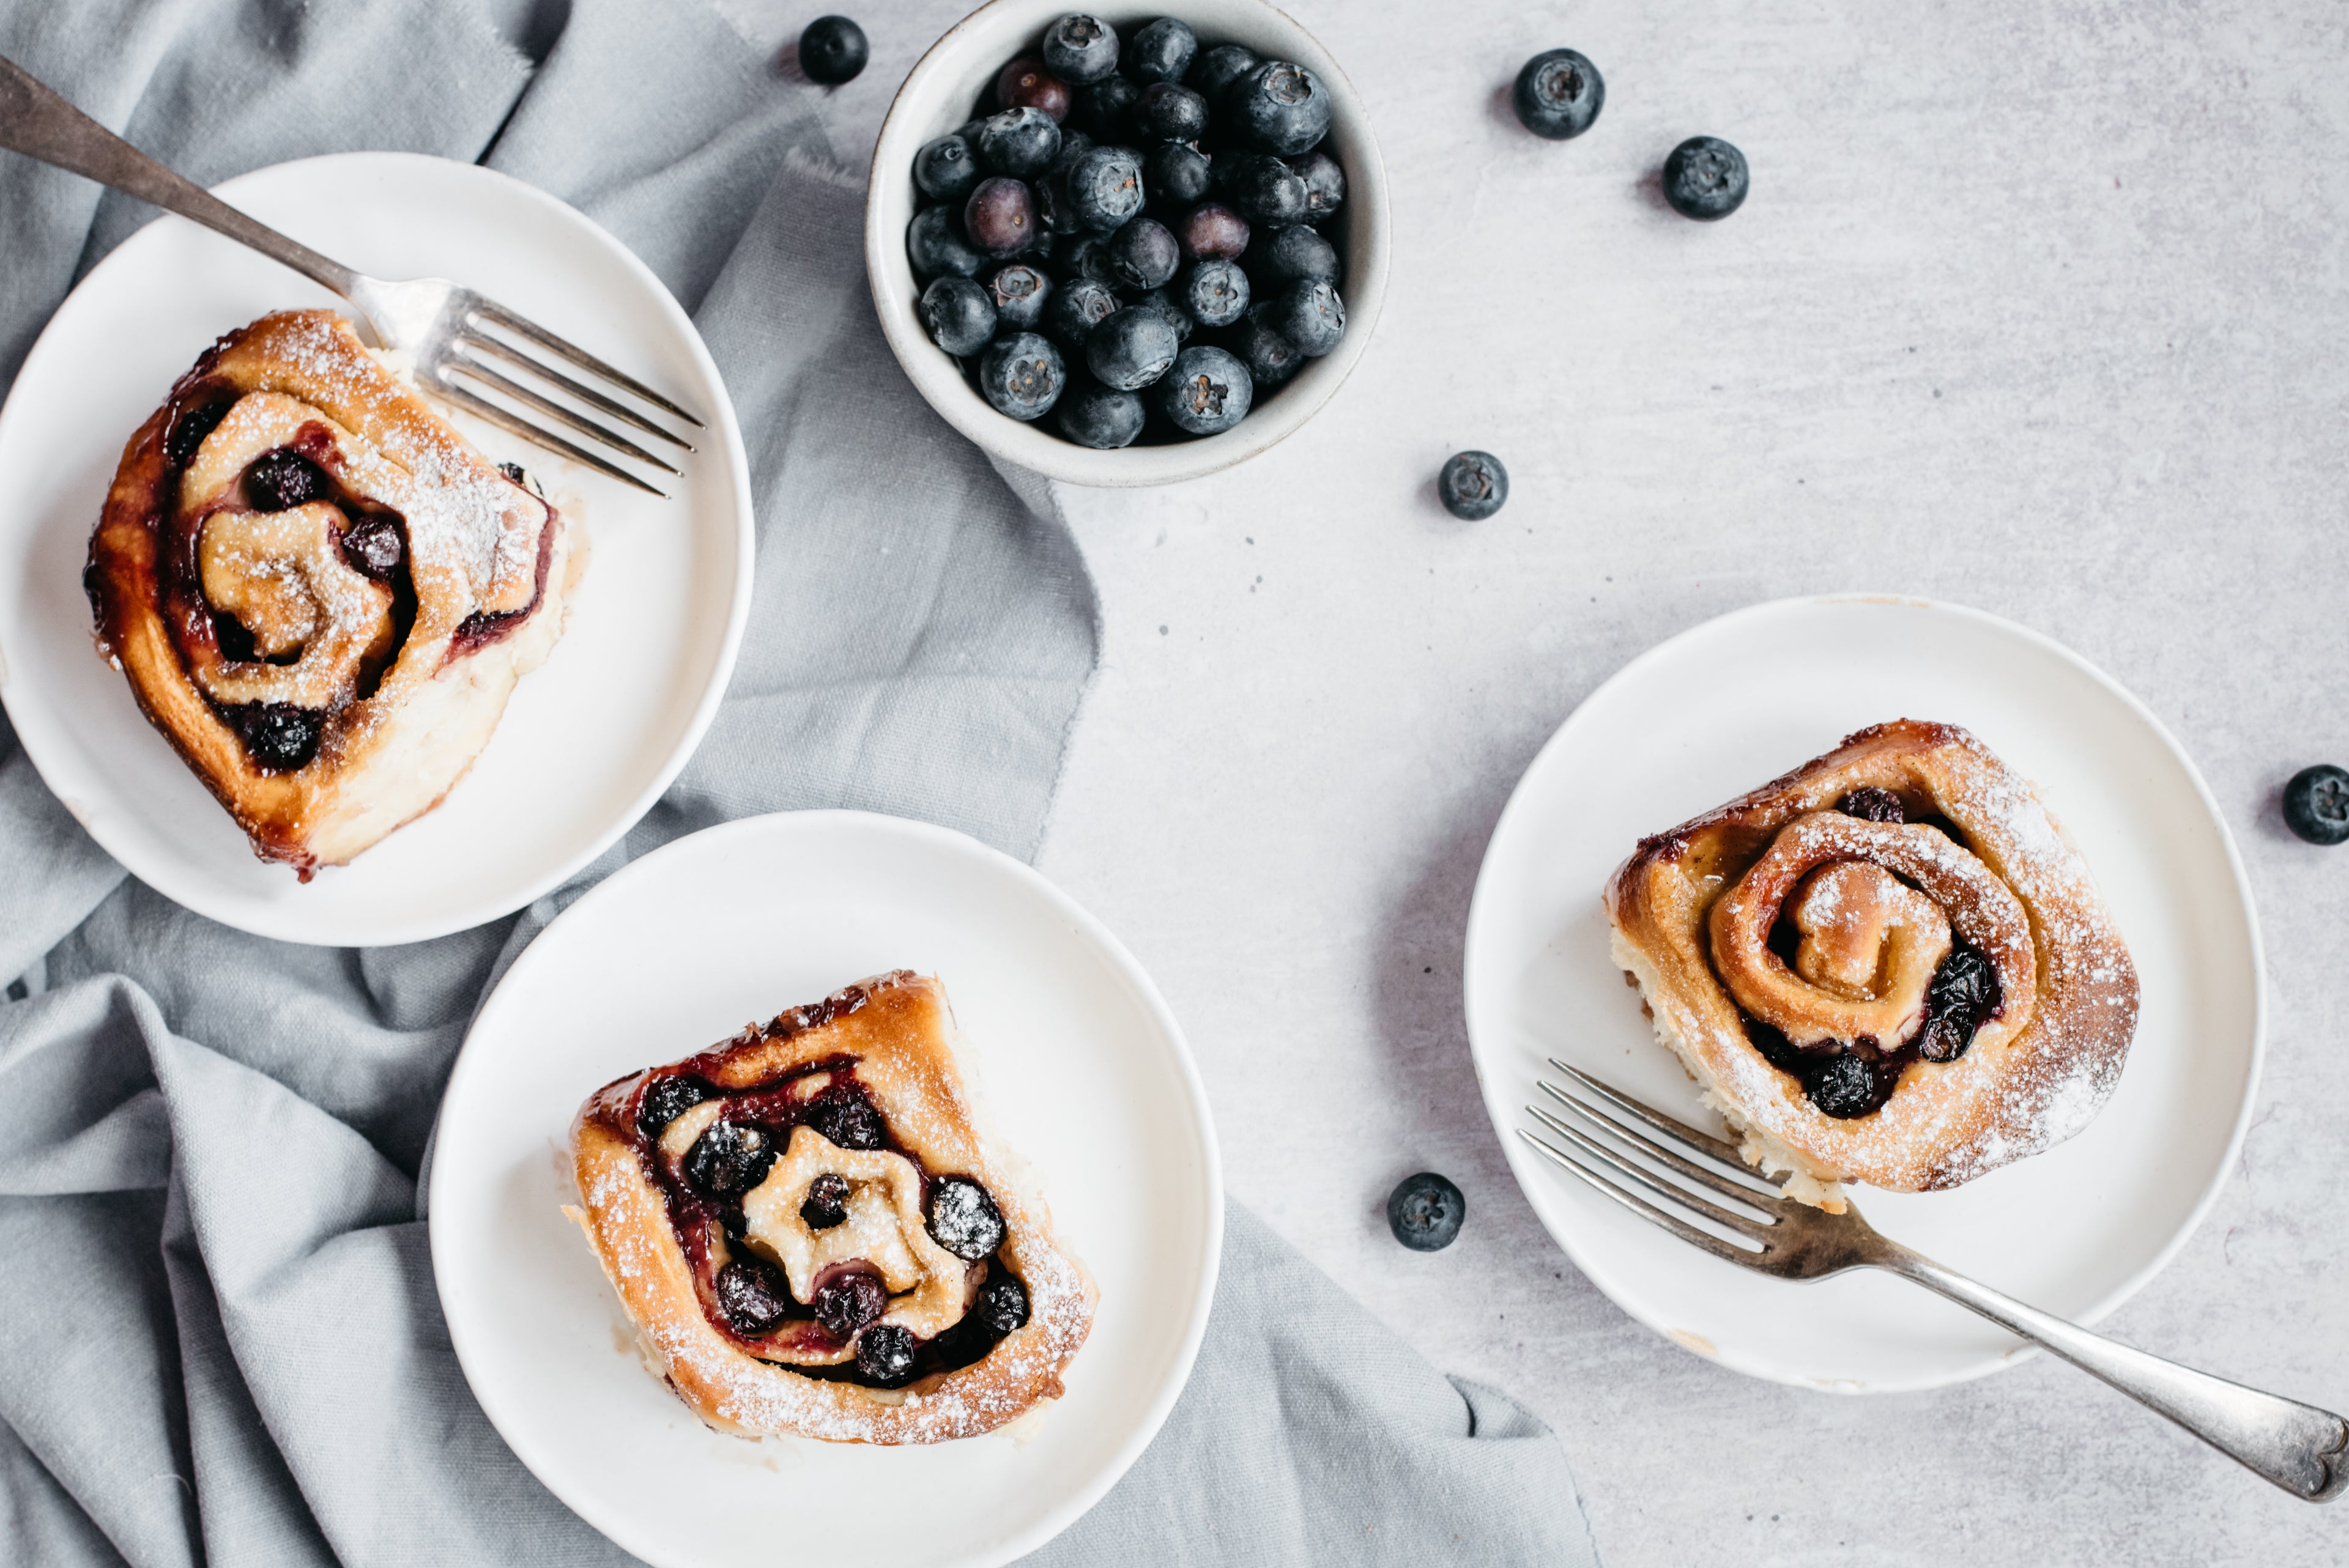 Blueberry & Vanilla Rolls on plates, with grey cloth and blueberries in a bowl